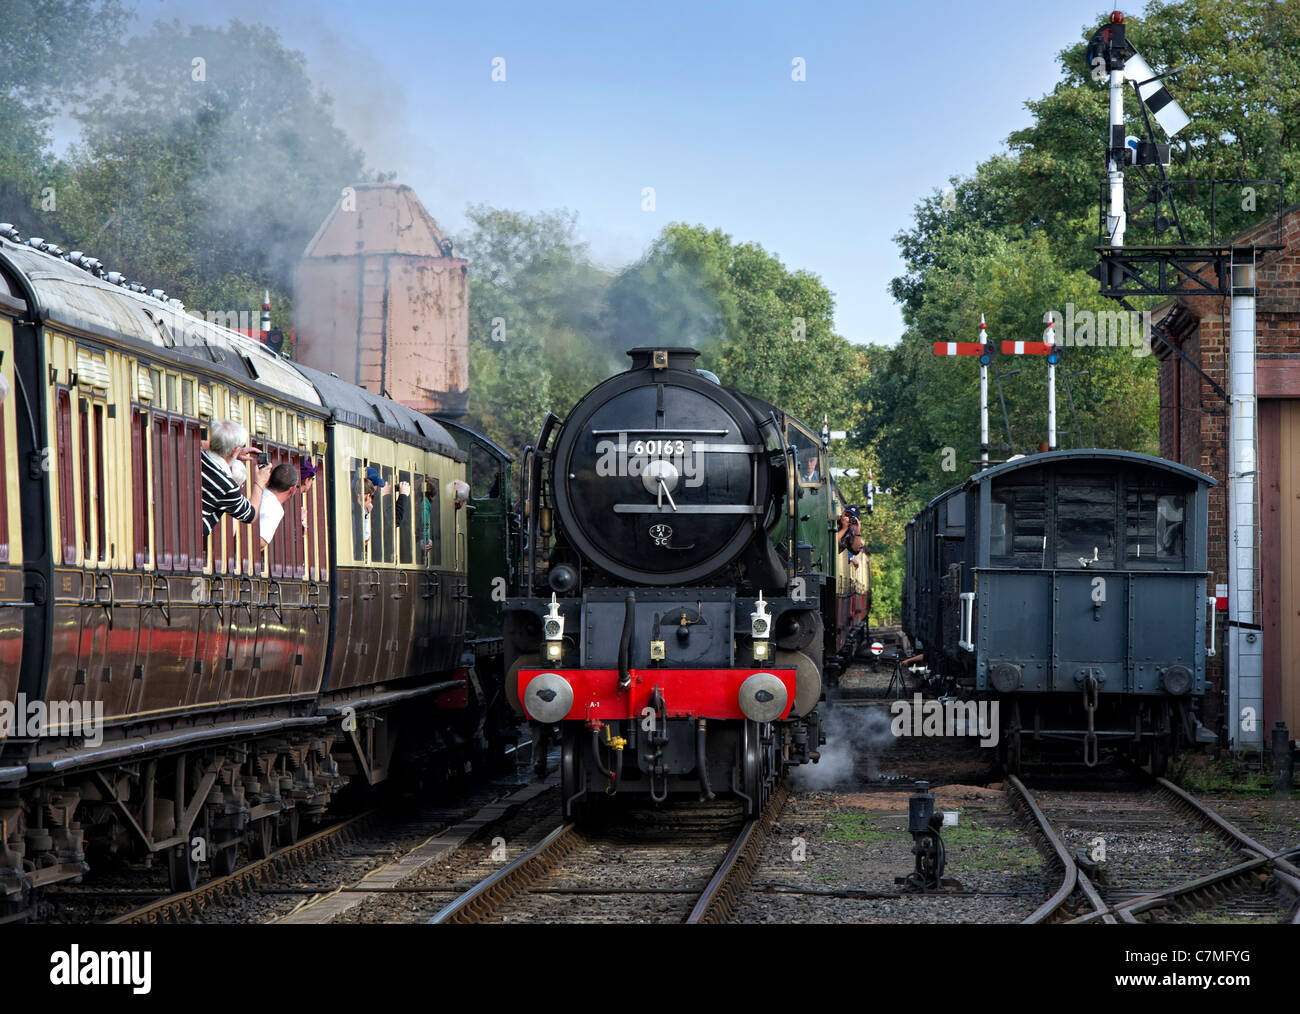 Peppercorn A1 Pacific No 60163 Tornado steam locomotive approaches Bewdley Station, Worcestershire on the Severn Valley Railway Stock Photo